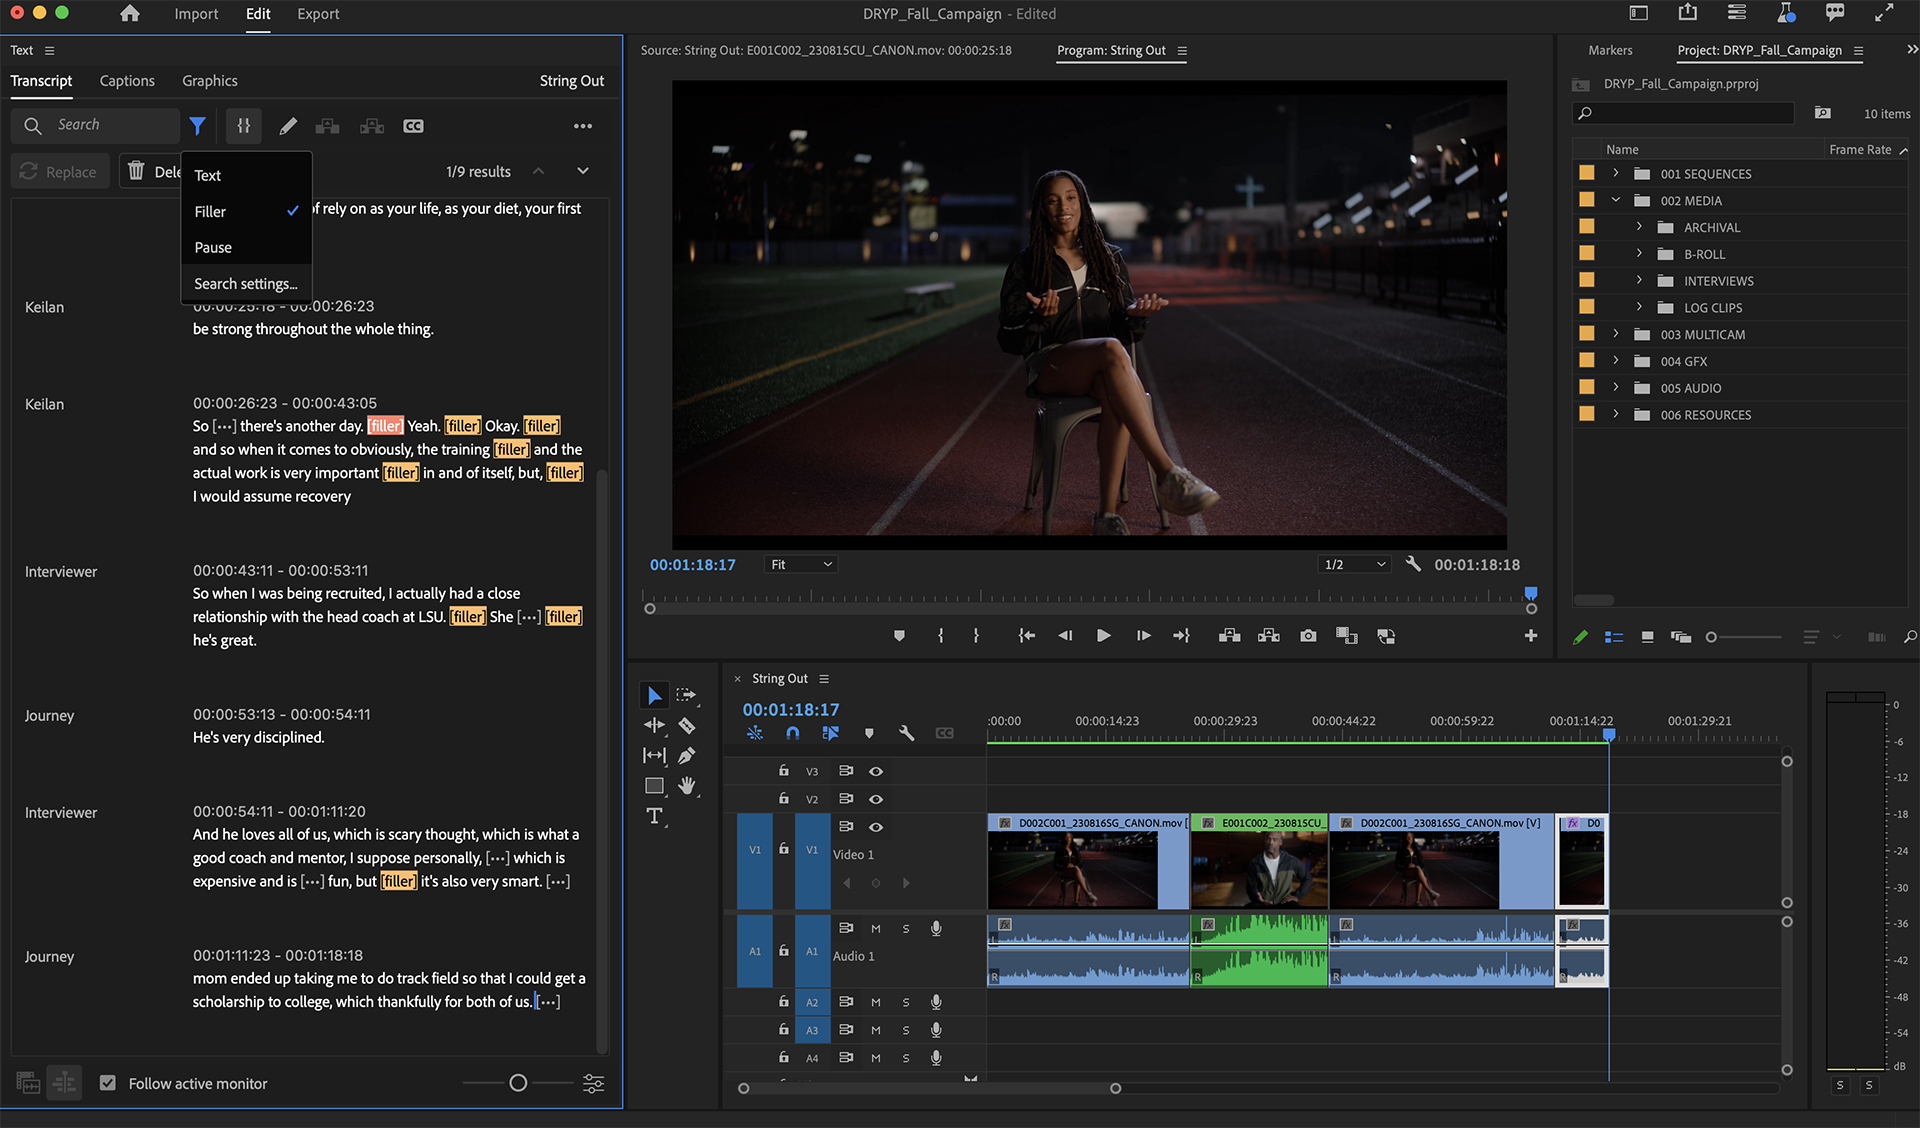 Adobe's updates for filmmakers - Text-based editing enhanced